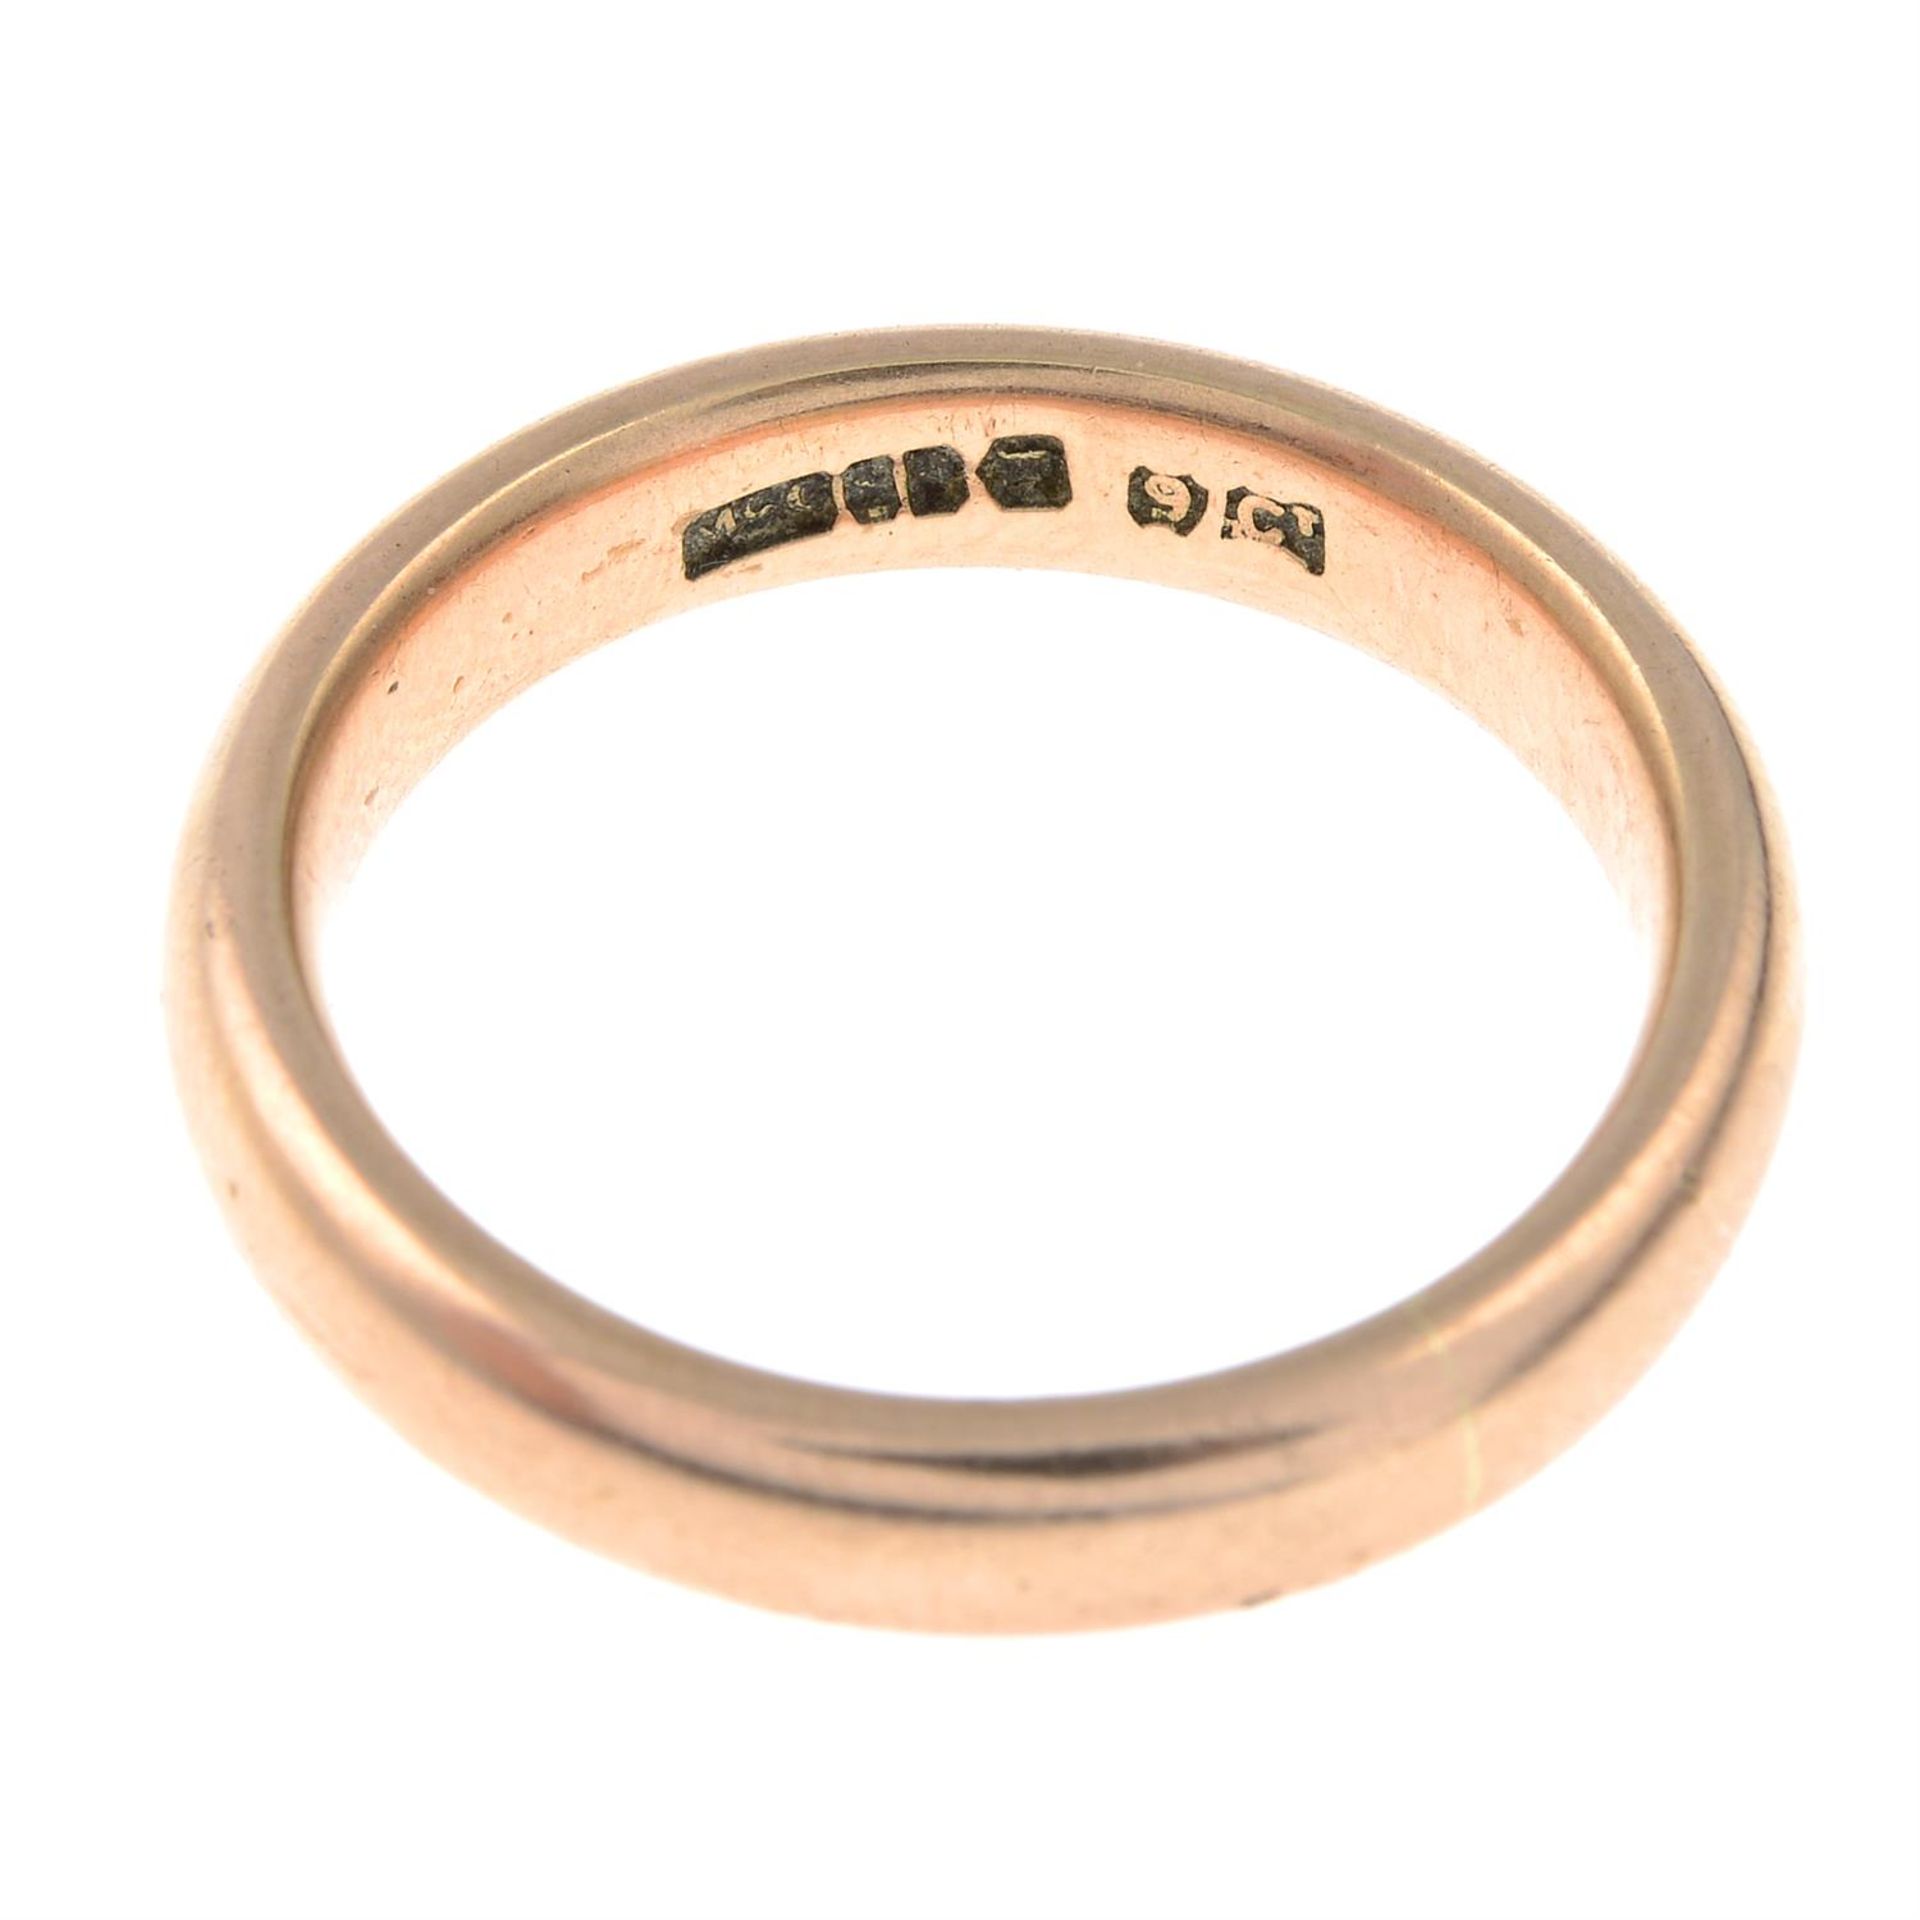 A 9ct gold plain band ring. - Image 2 of 2